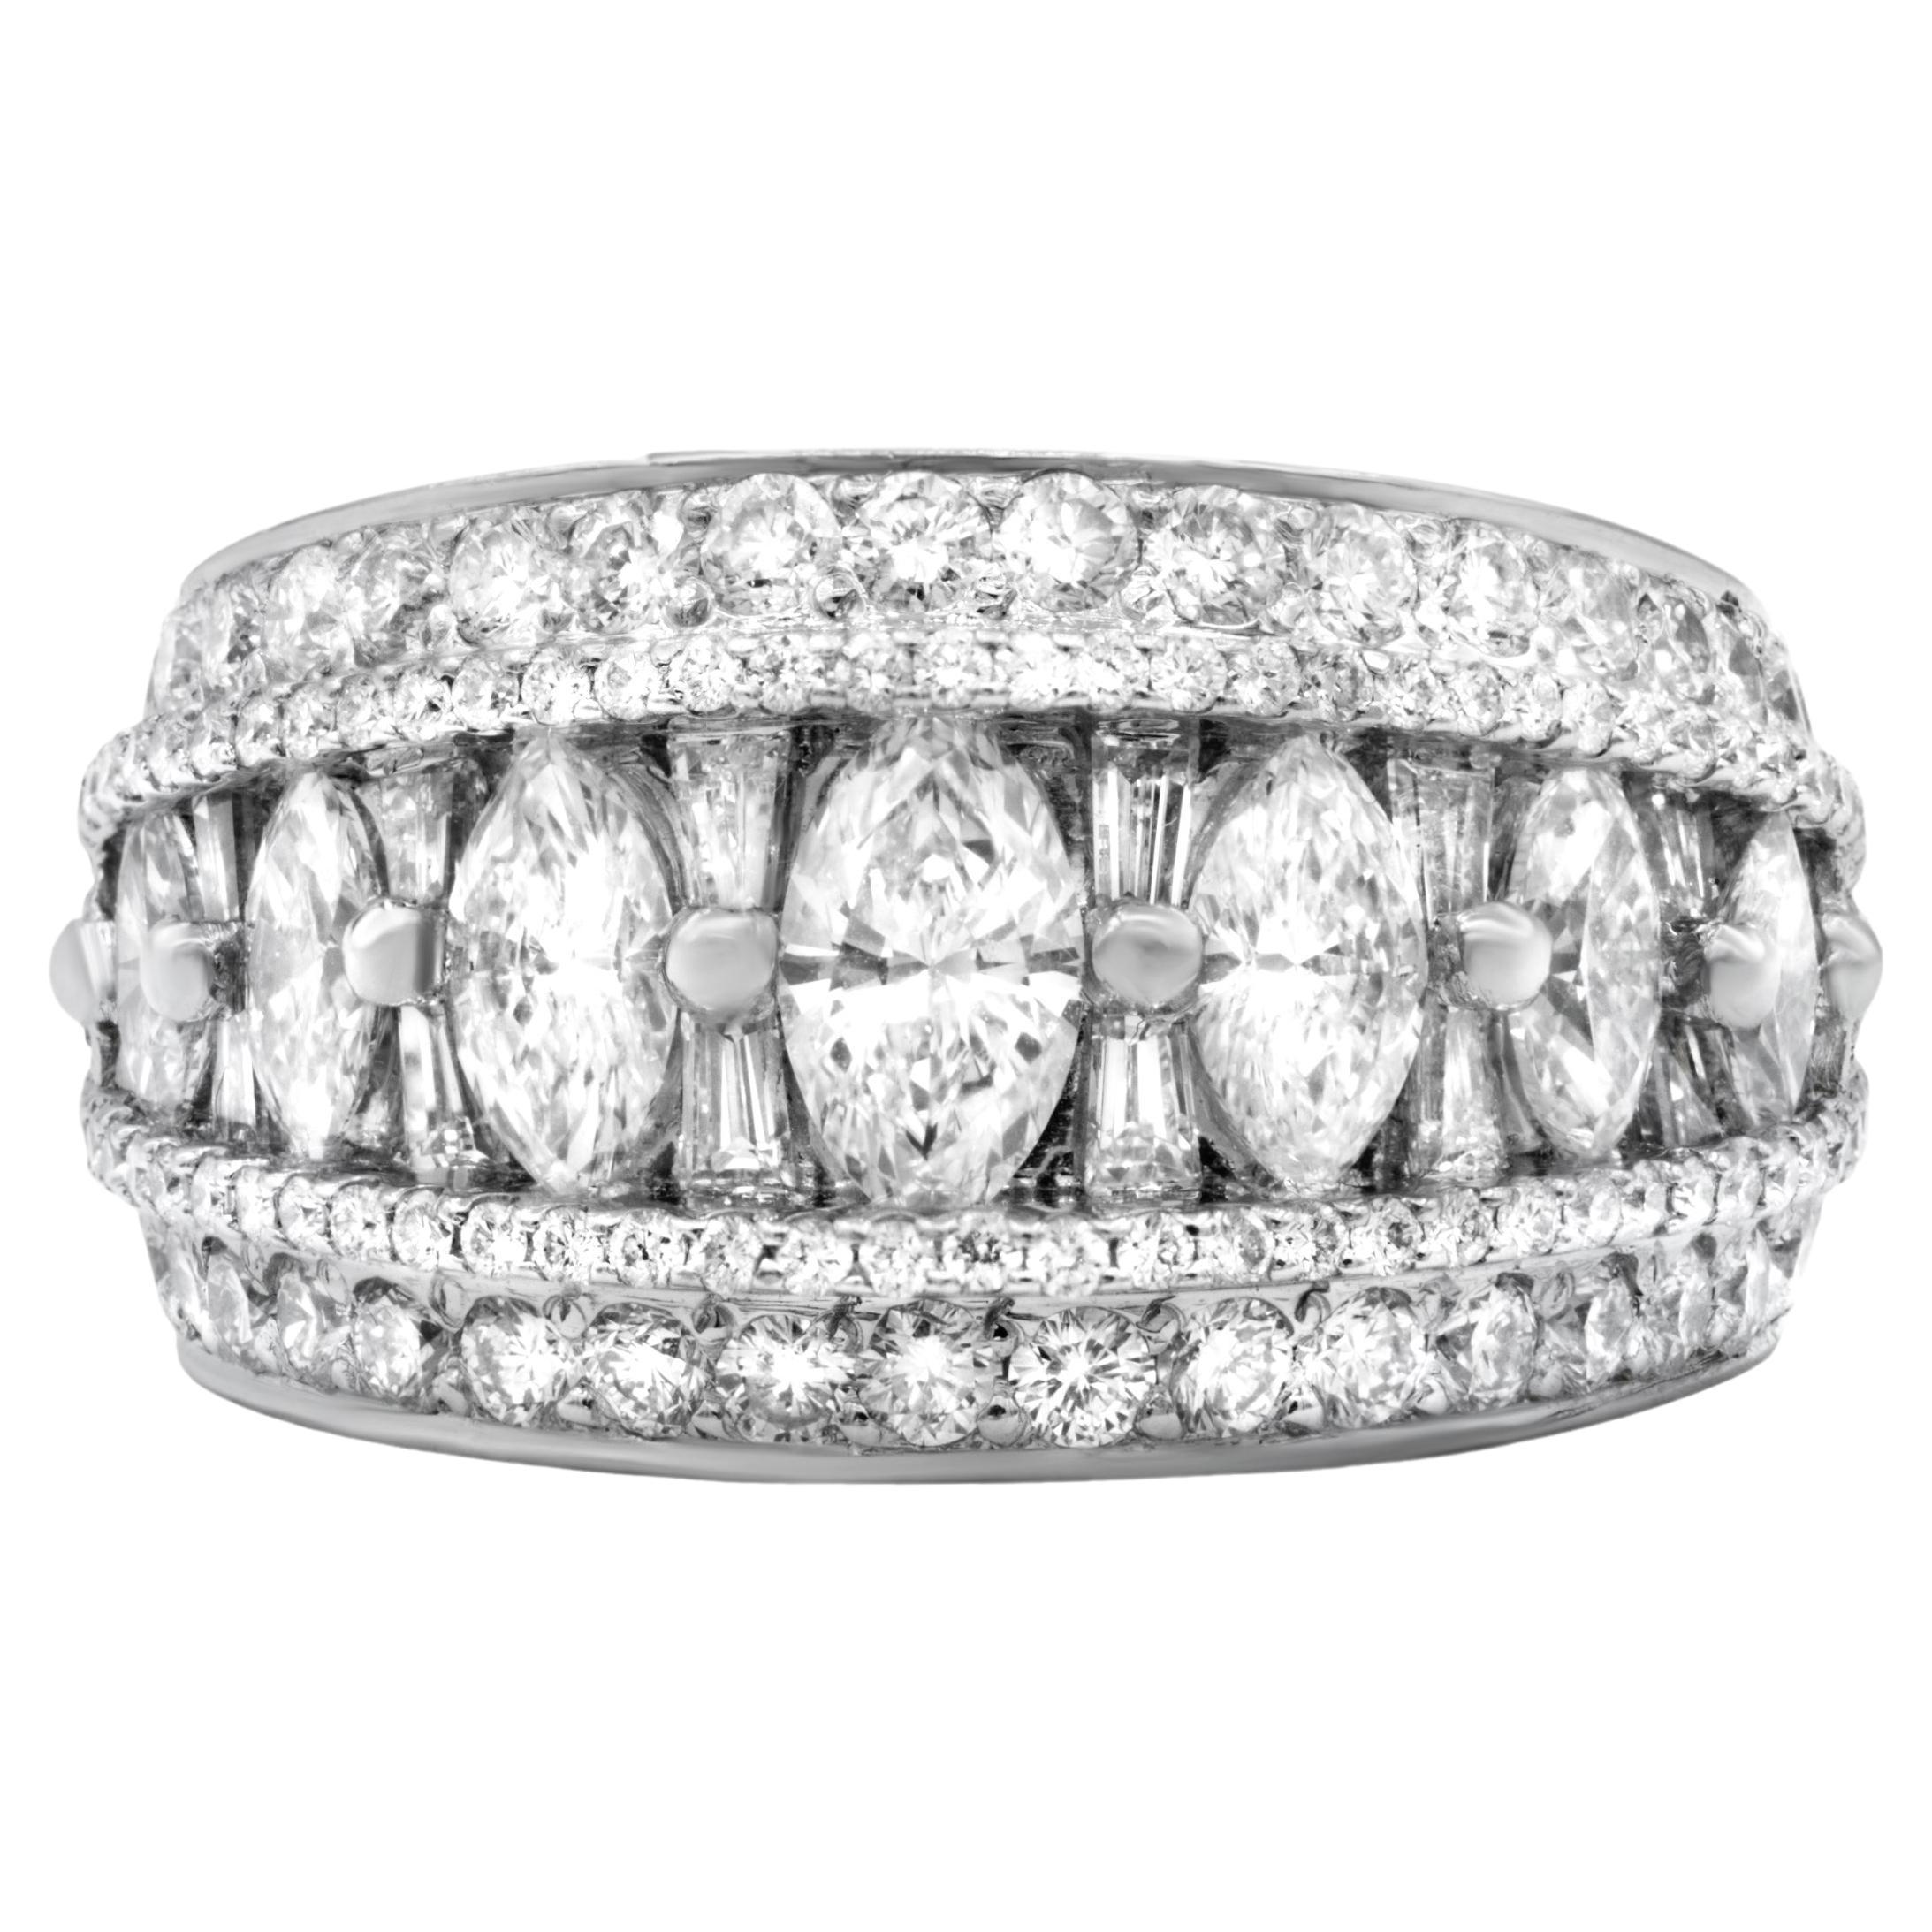 Diana M. Platinum diamond band adorned with rows of marquise, baguette 4.25cts For Sale